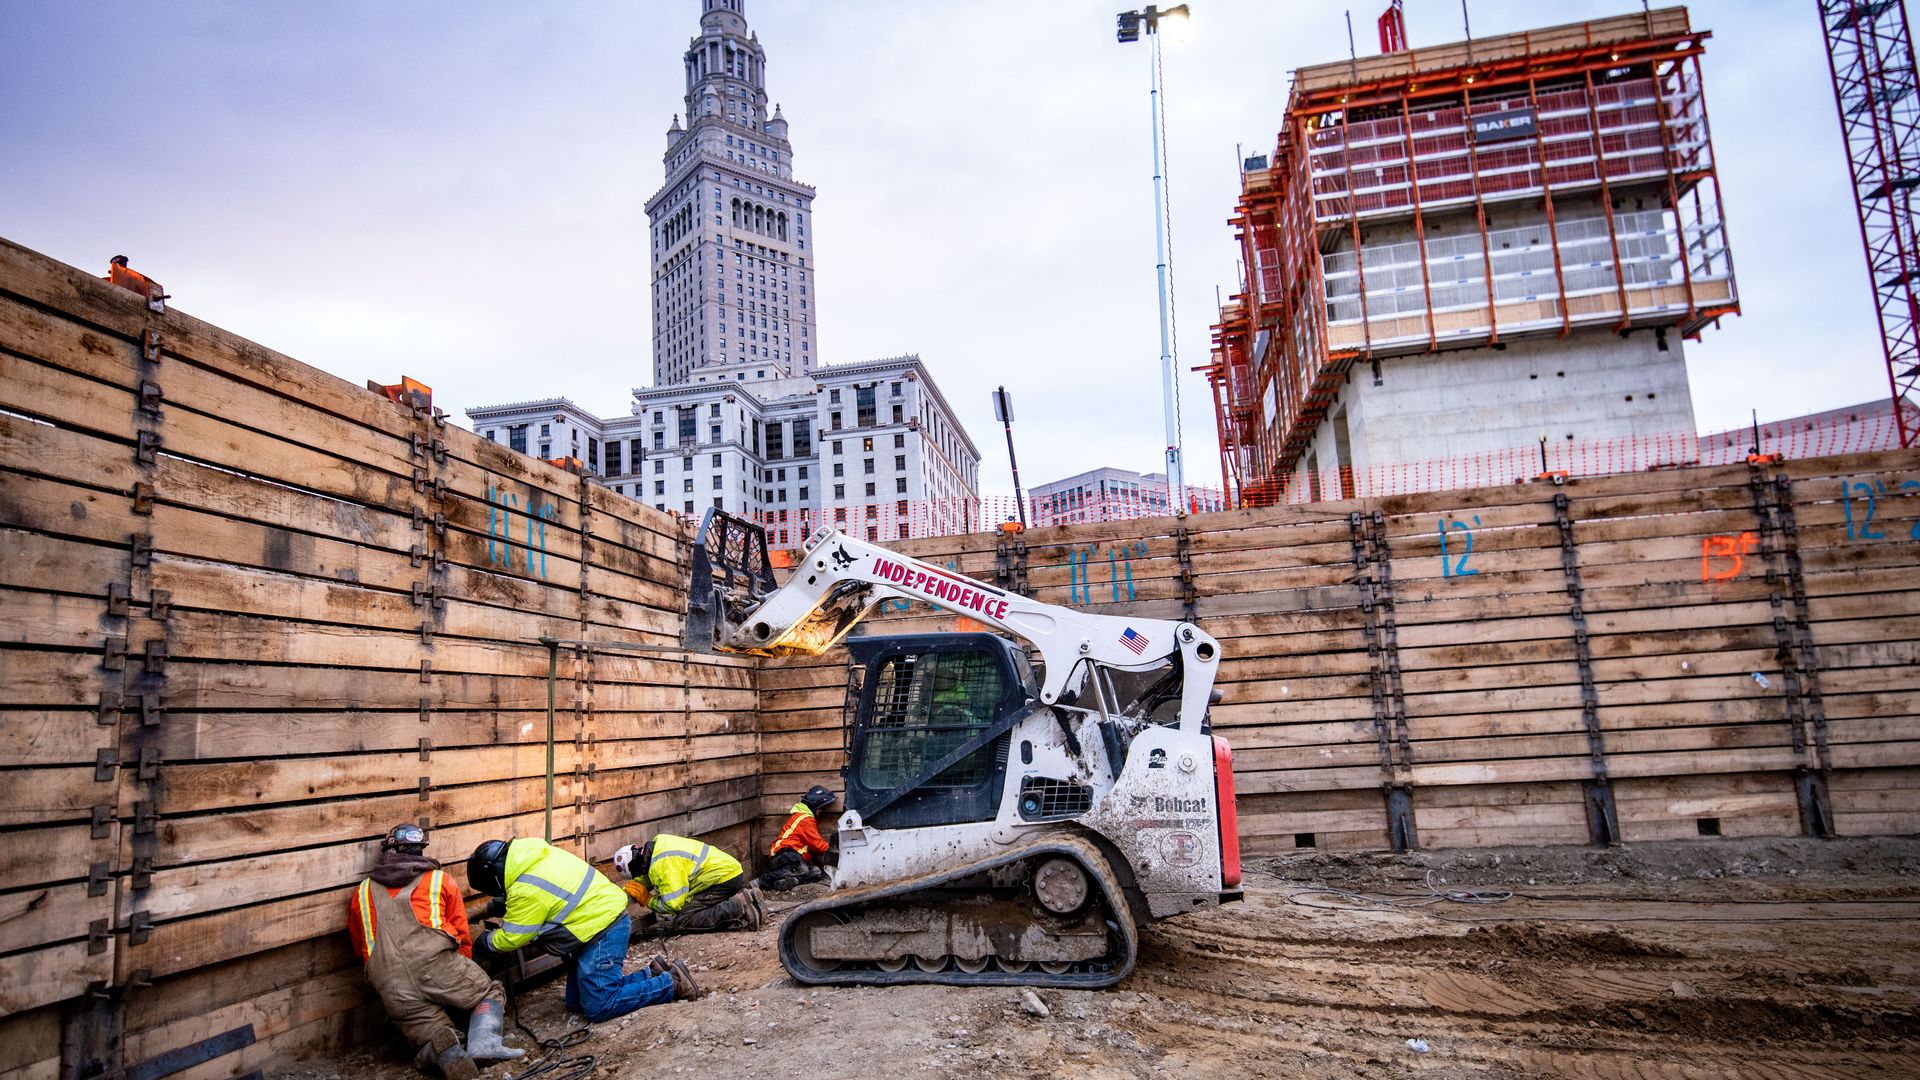 Construction site for new Sherwin Williams headquarters in downtown Cleveland, with Terminal Tower in the background